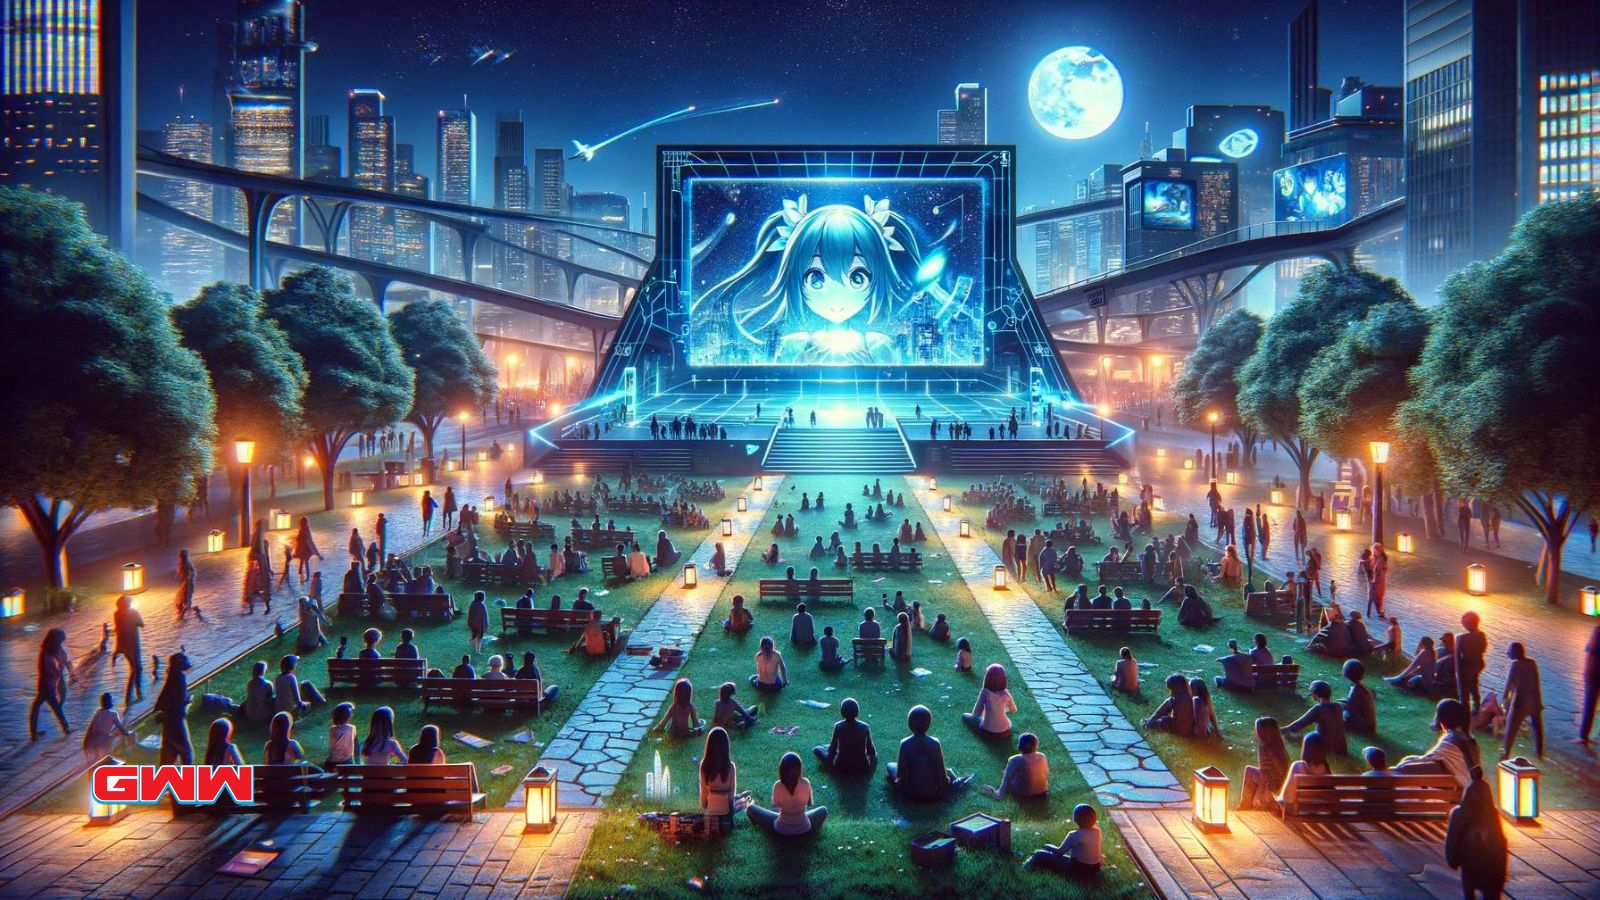 Urban park with anime screening, watch anime for free alternative